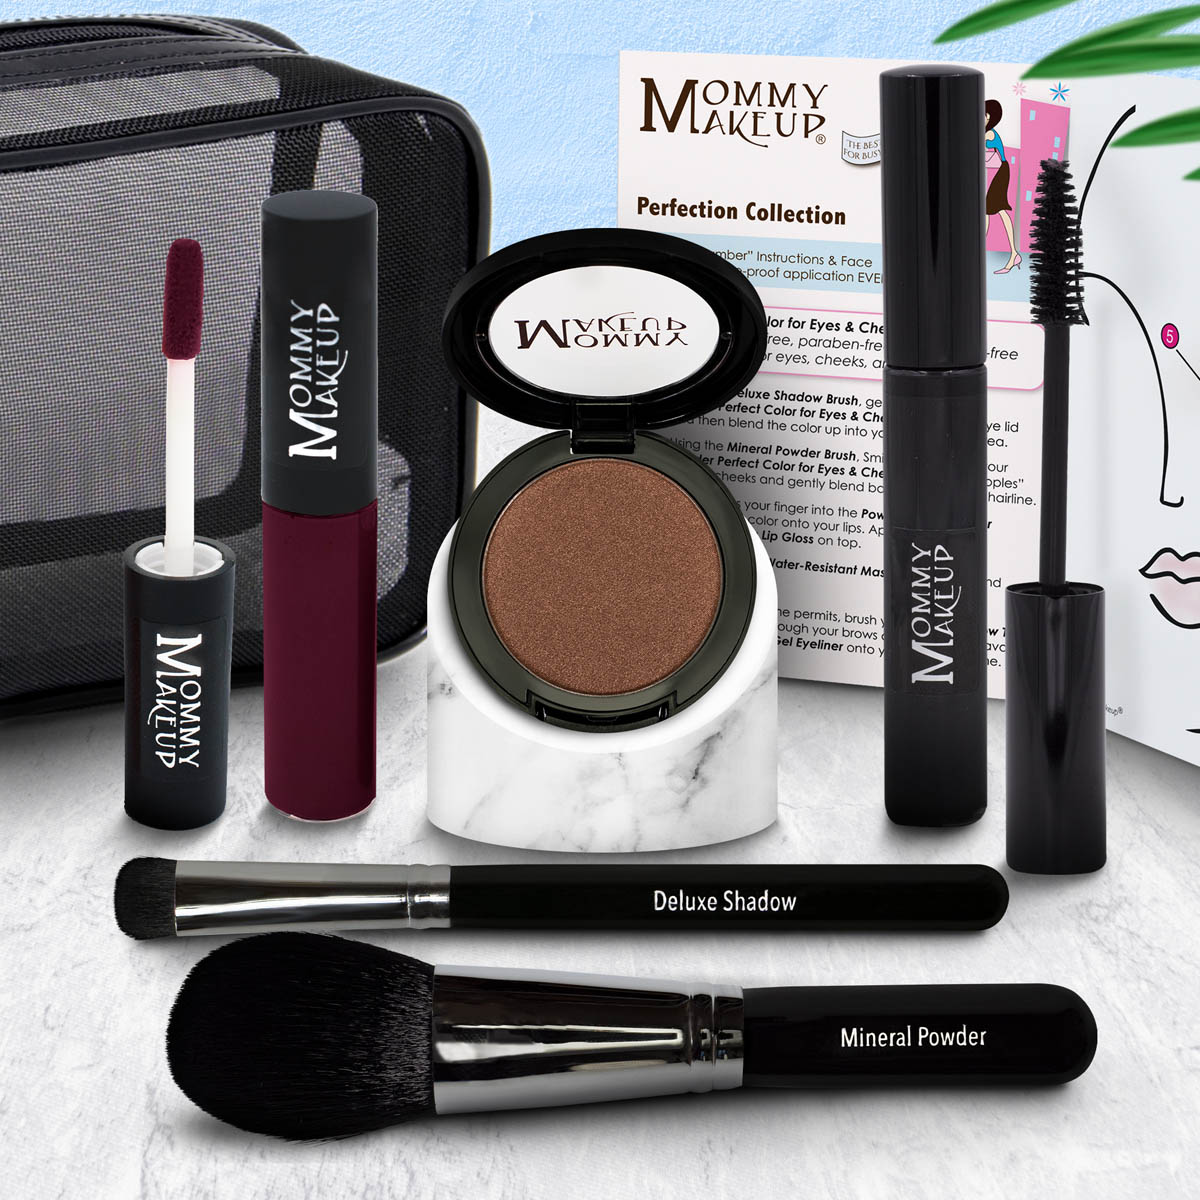 This 6 piece makeup kit is perfect for a quick, ultra easy, radiant look! A fabulous travel-friendly, multi-tasking makeup kit will give you a fresh glowing look that is super simple to apply. Select your own colors!